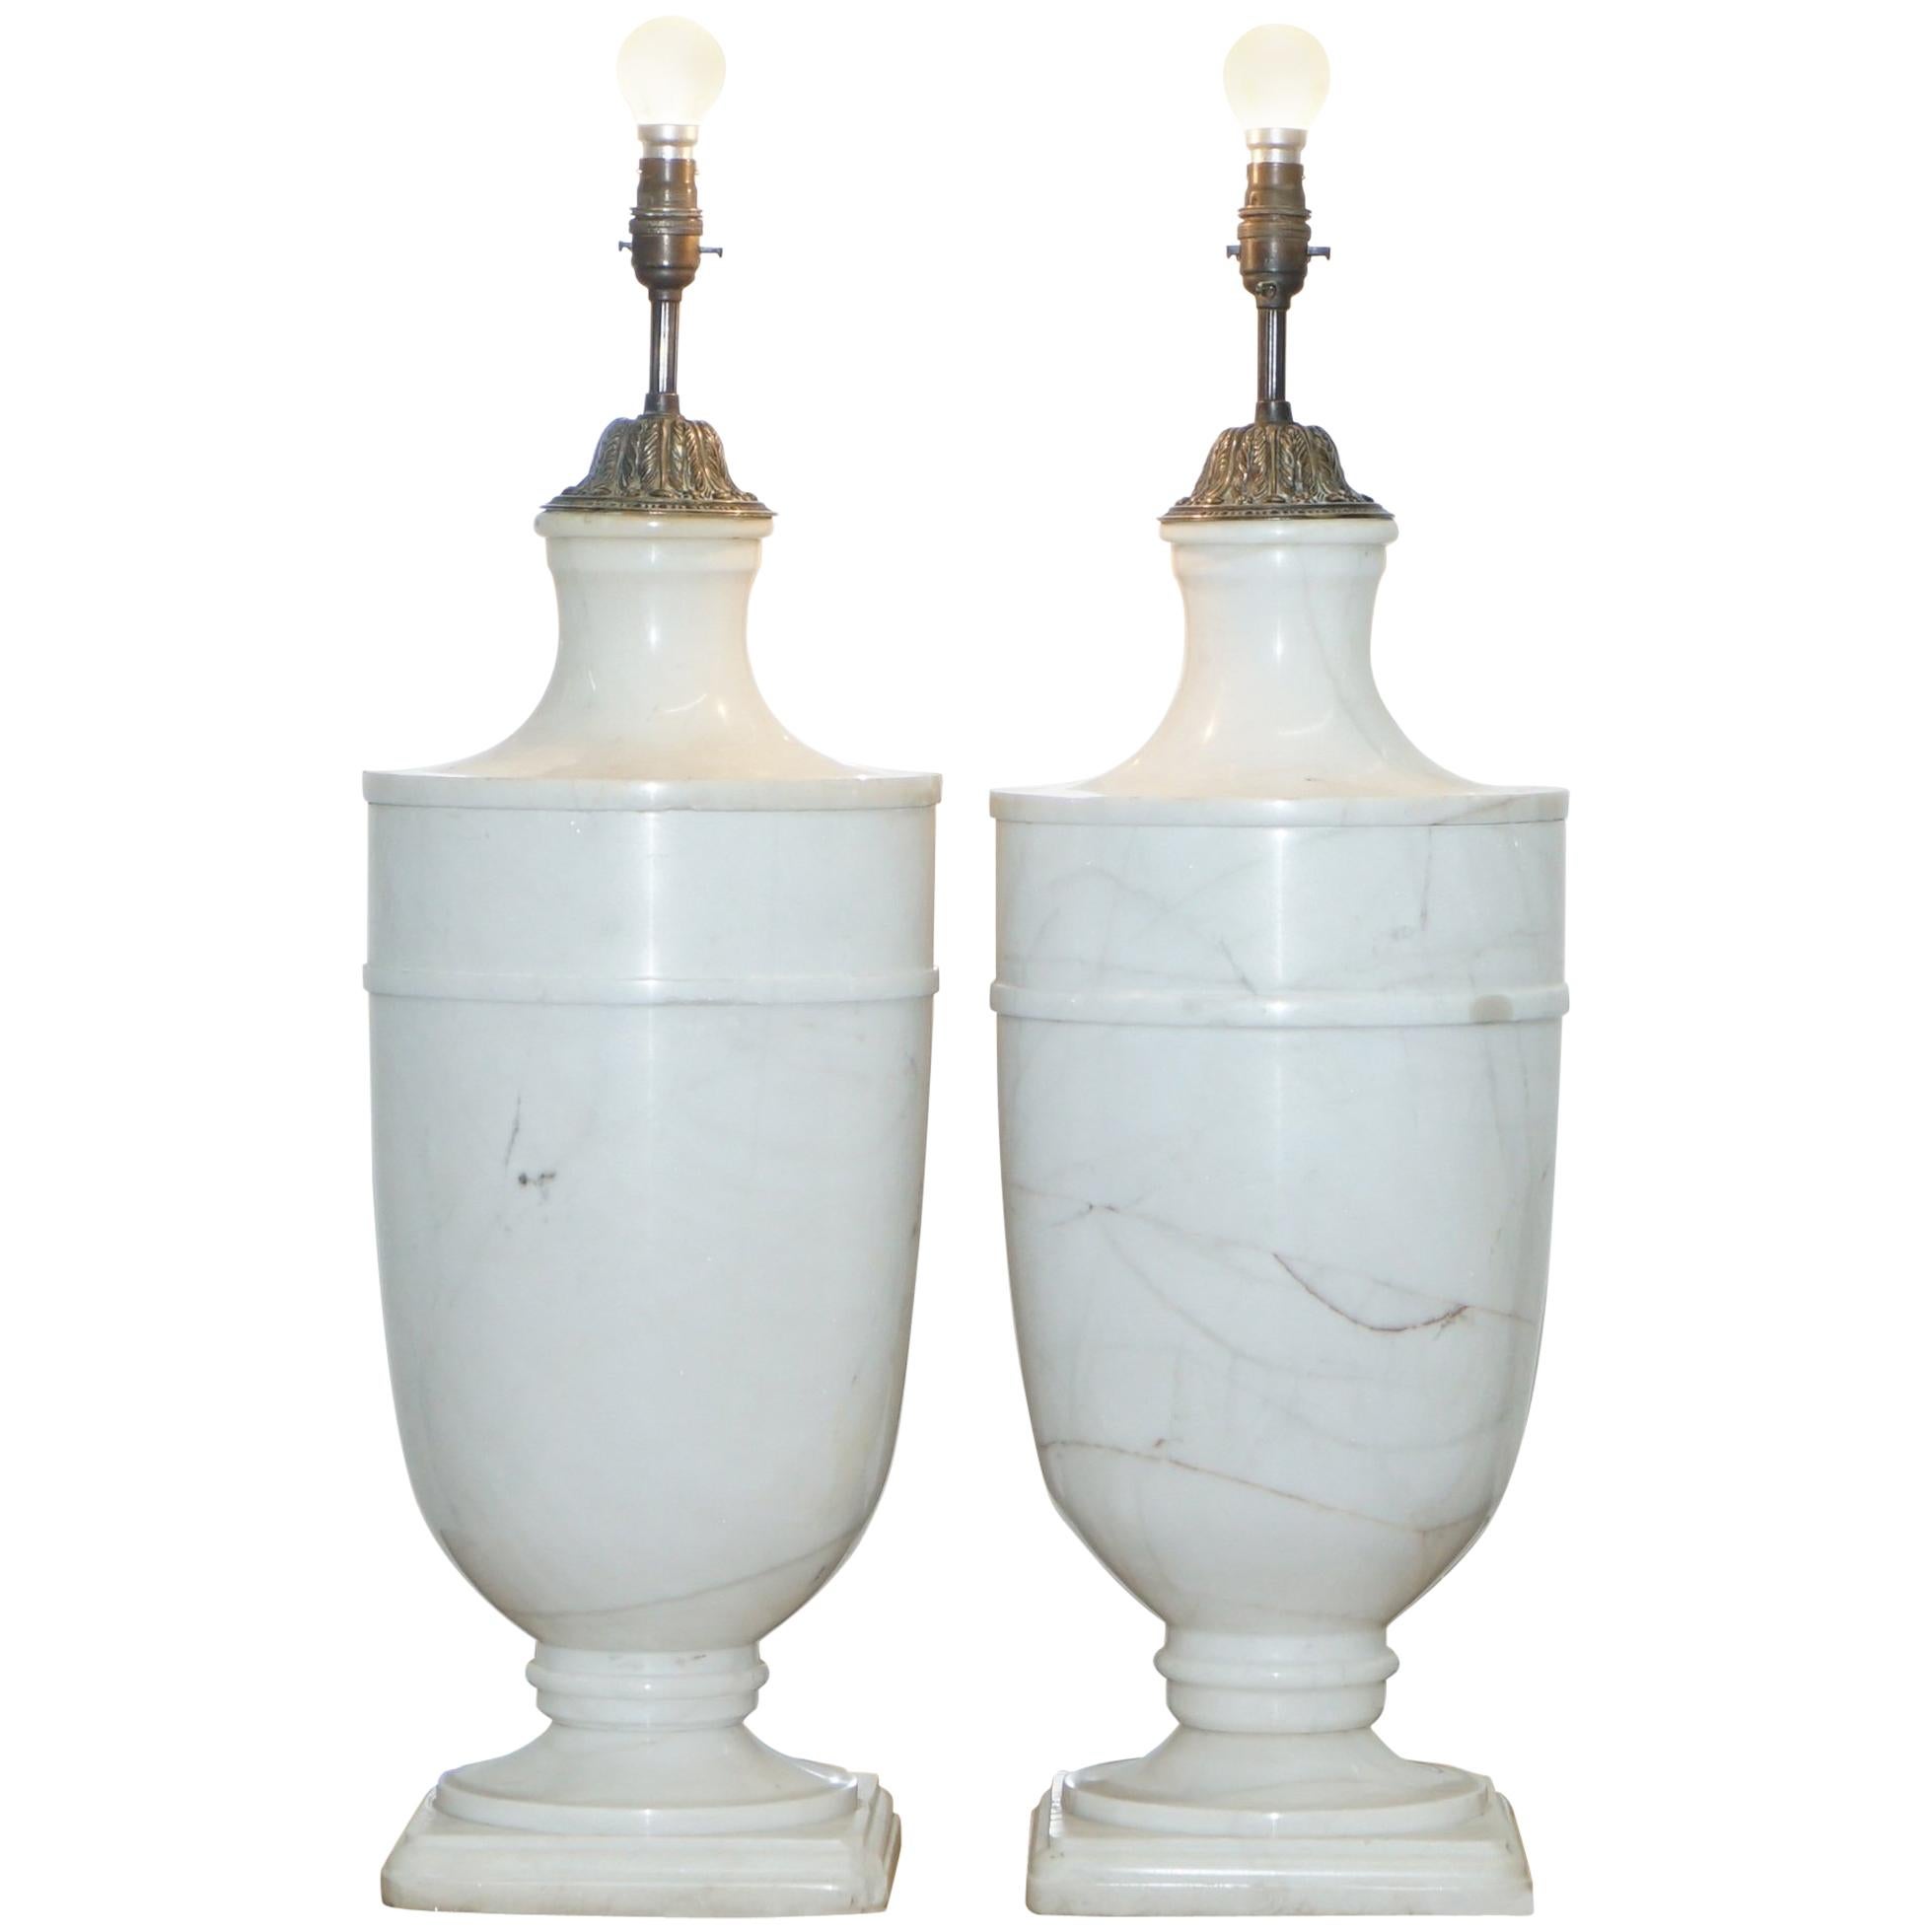 Pair of Huge Tall Solid Italian White Marble Urn Lamps, circa 1920s Rare